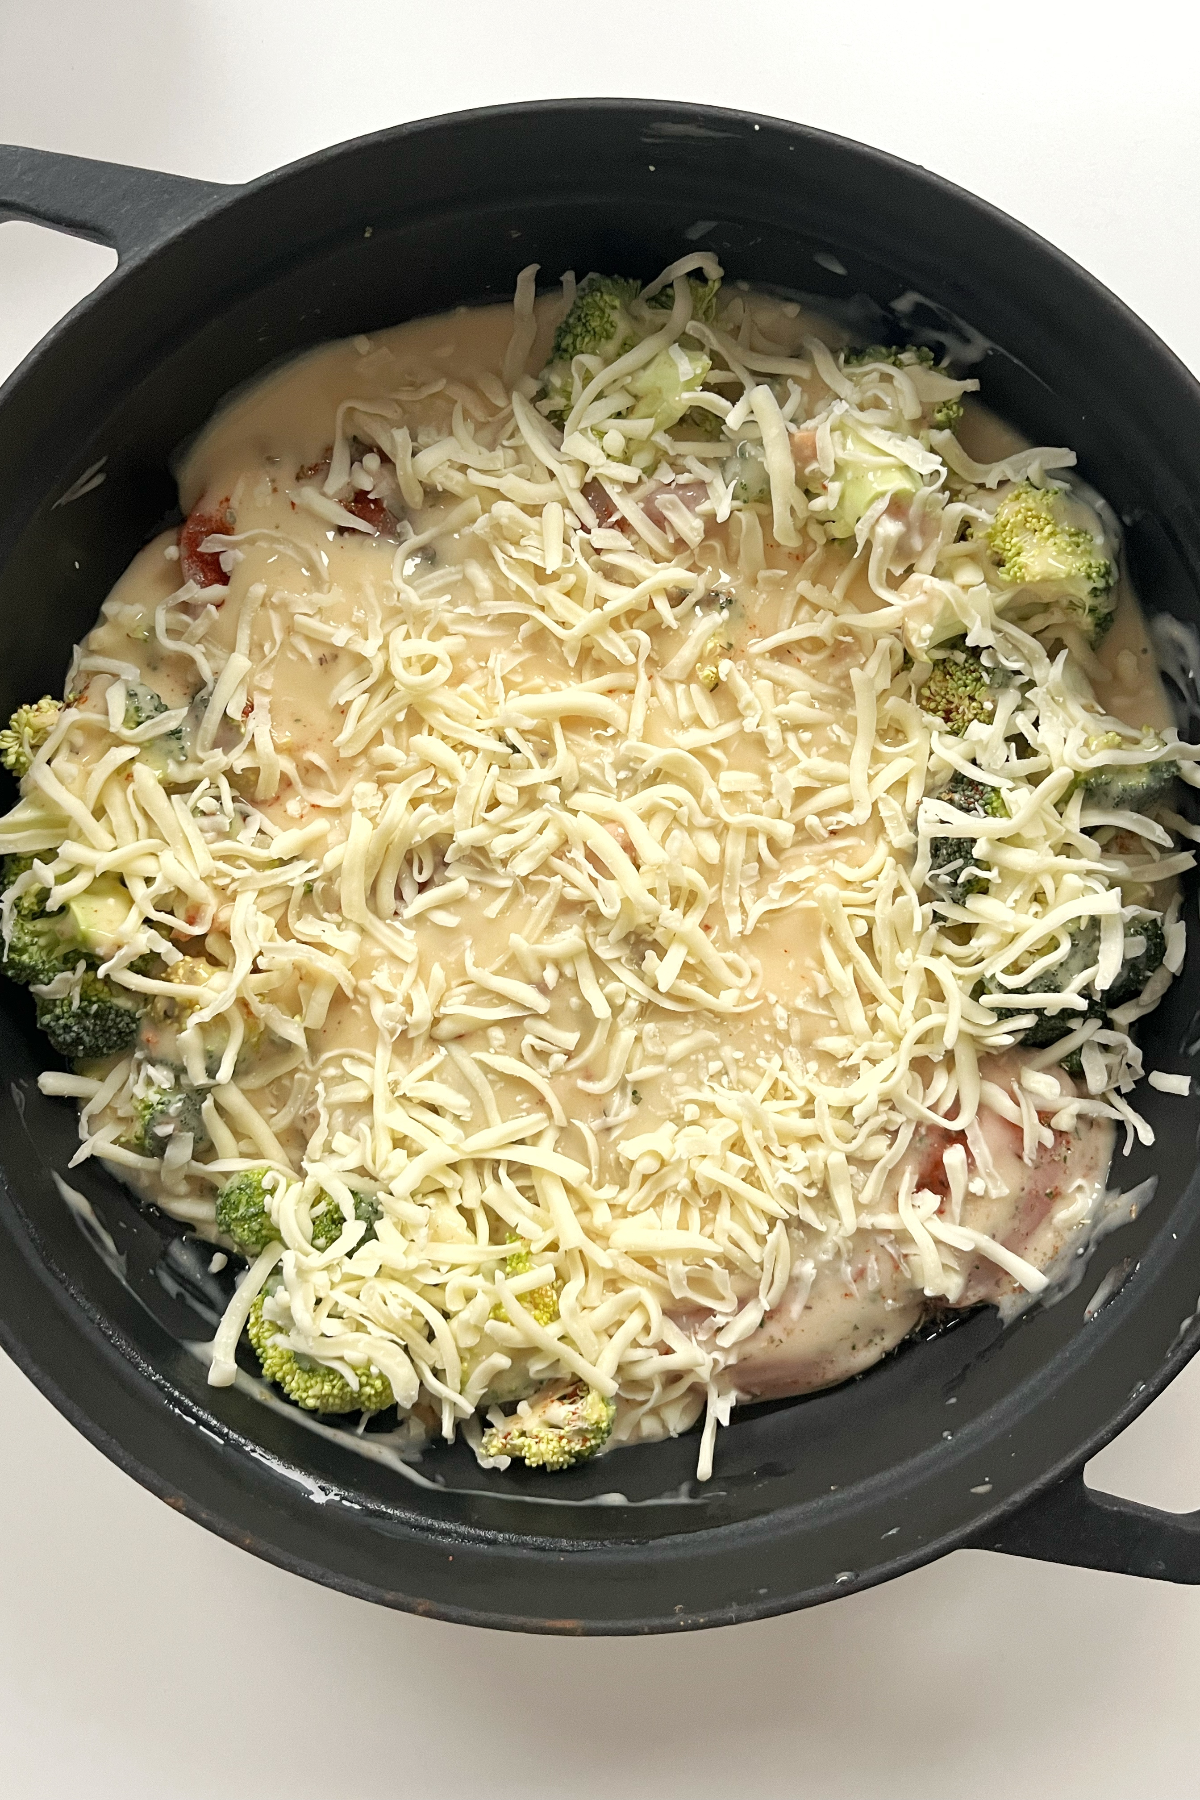 Black casserole dish with chicken, broccoli, cream of chicken soup, and cheese. 